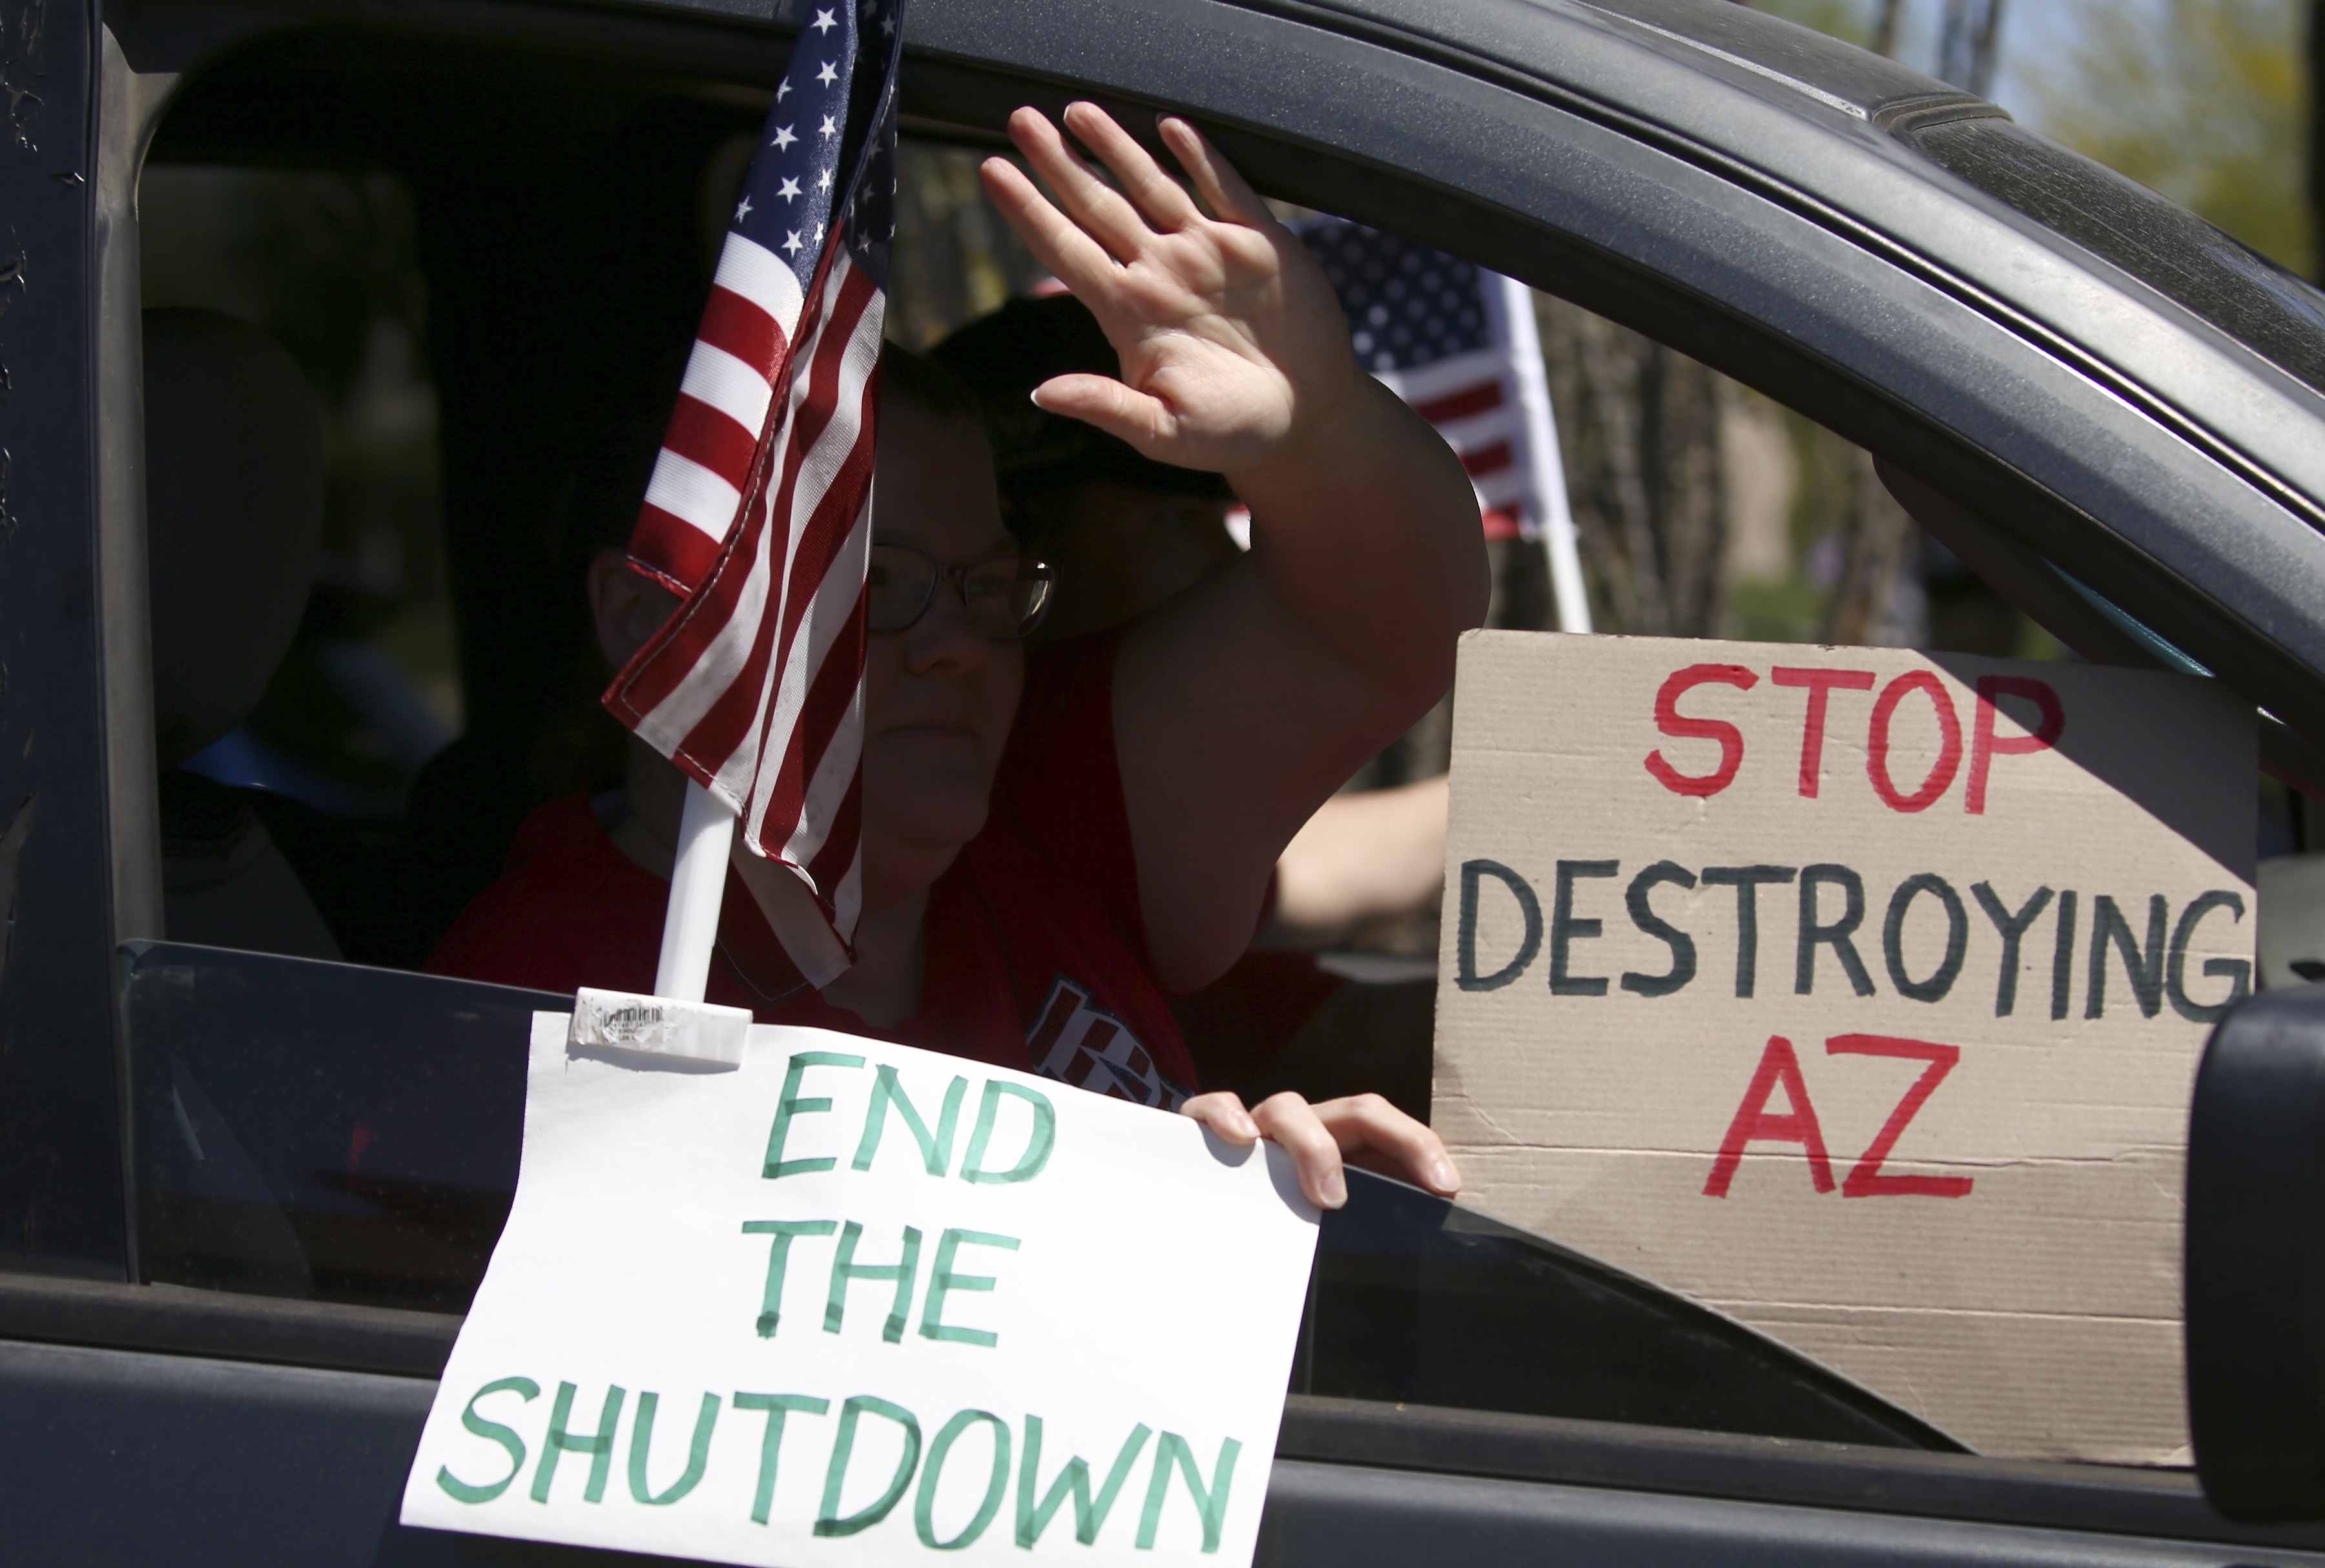 Protesters drive by in support of a rally at the state Capitol to 're-open' Arizona against the governor's stay-at-home order due to the coronavirus Monday, April 20, 2020, in Phoenix. (AP Photo/Ross D. Franklin)